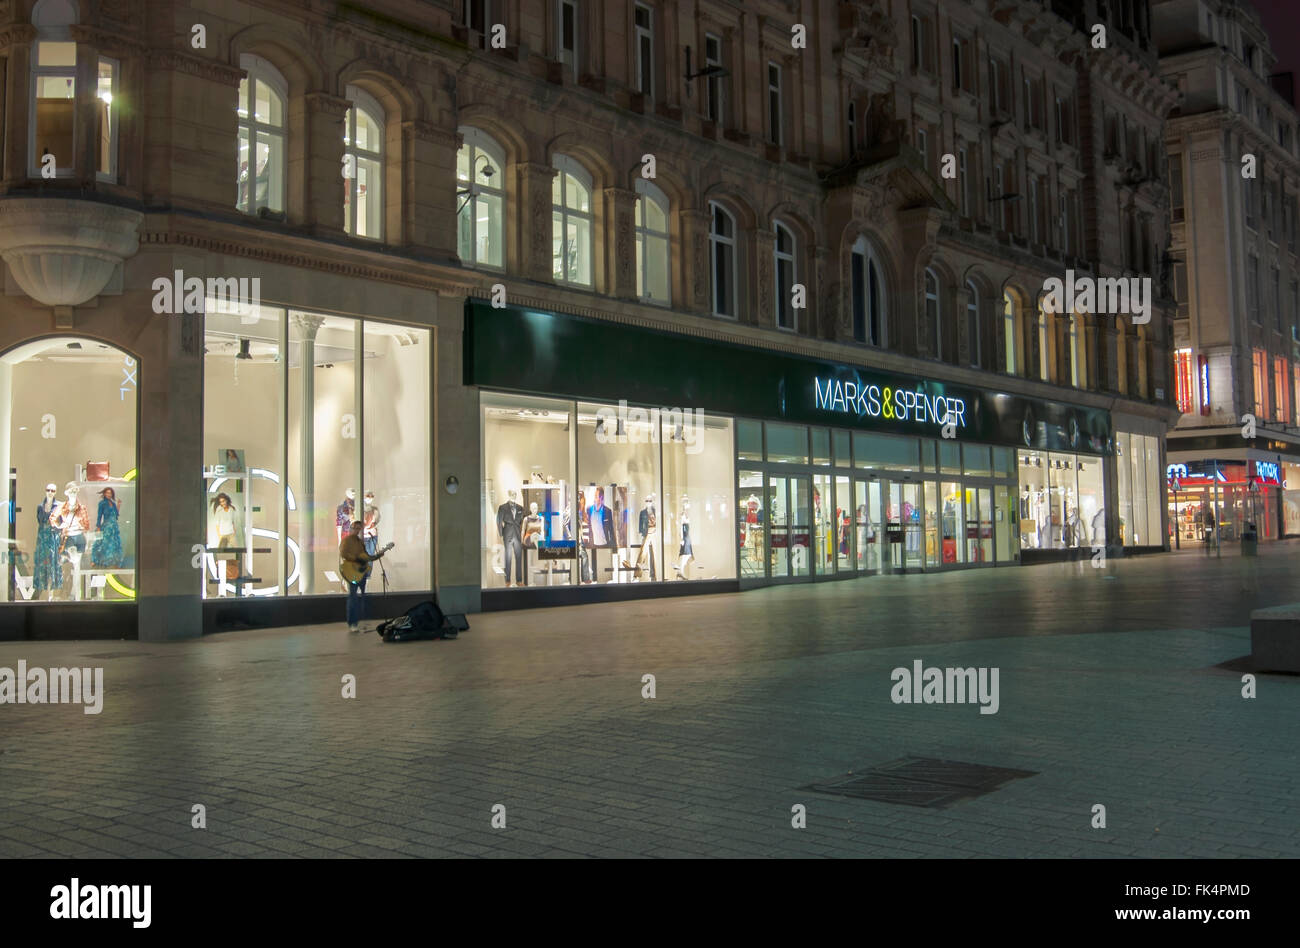 Marks & Spencer store in Church Street, Liverpool at night Stock Photo